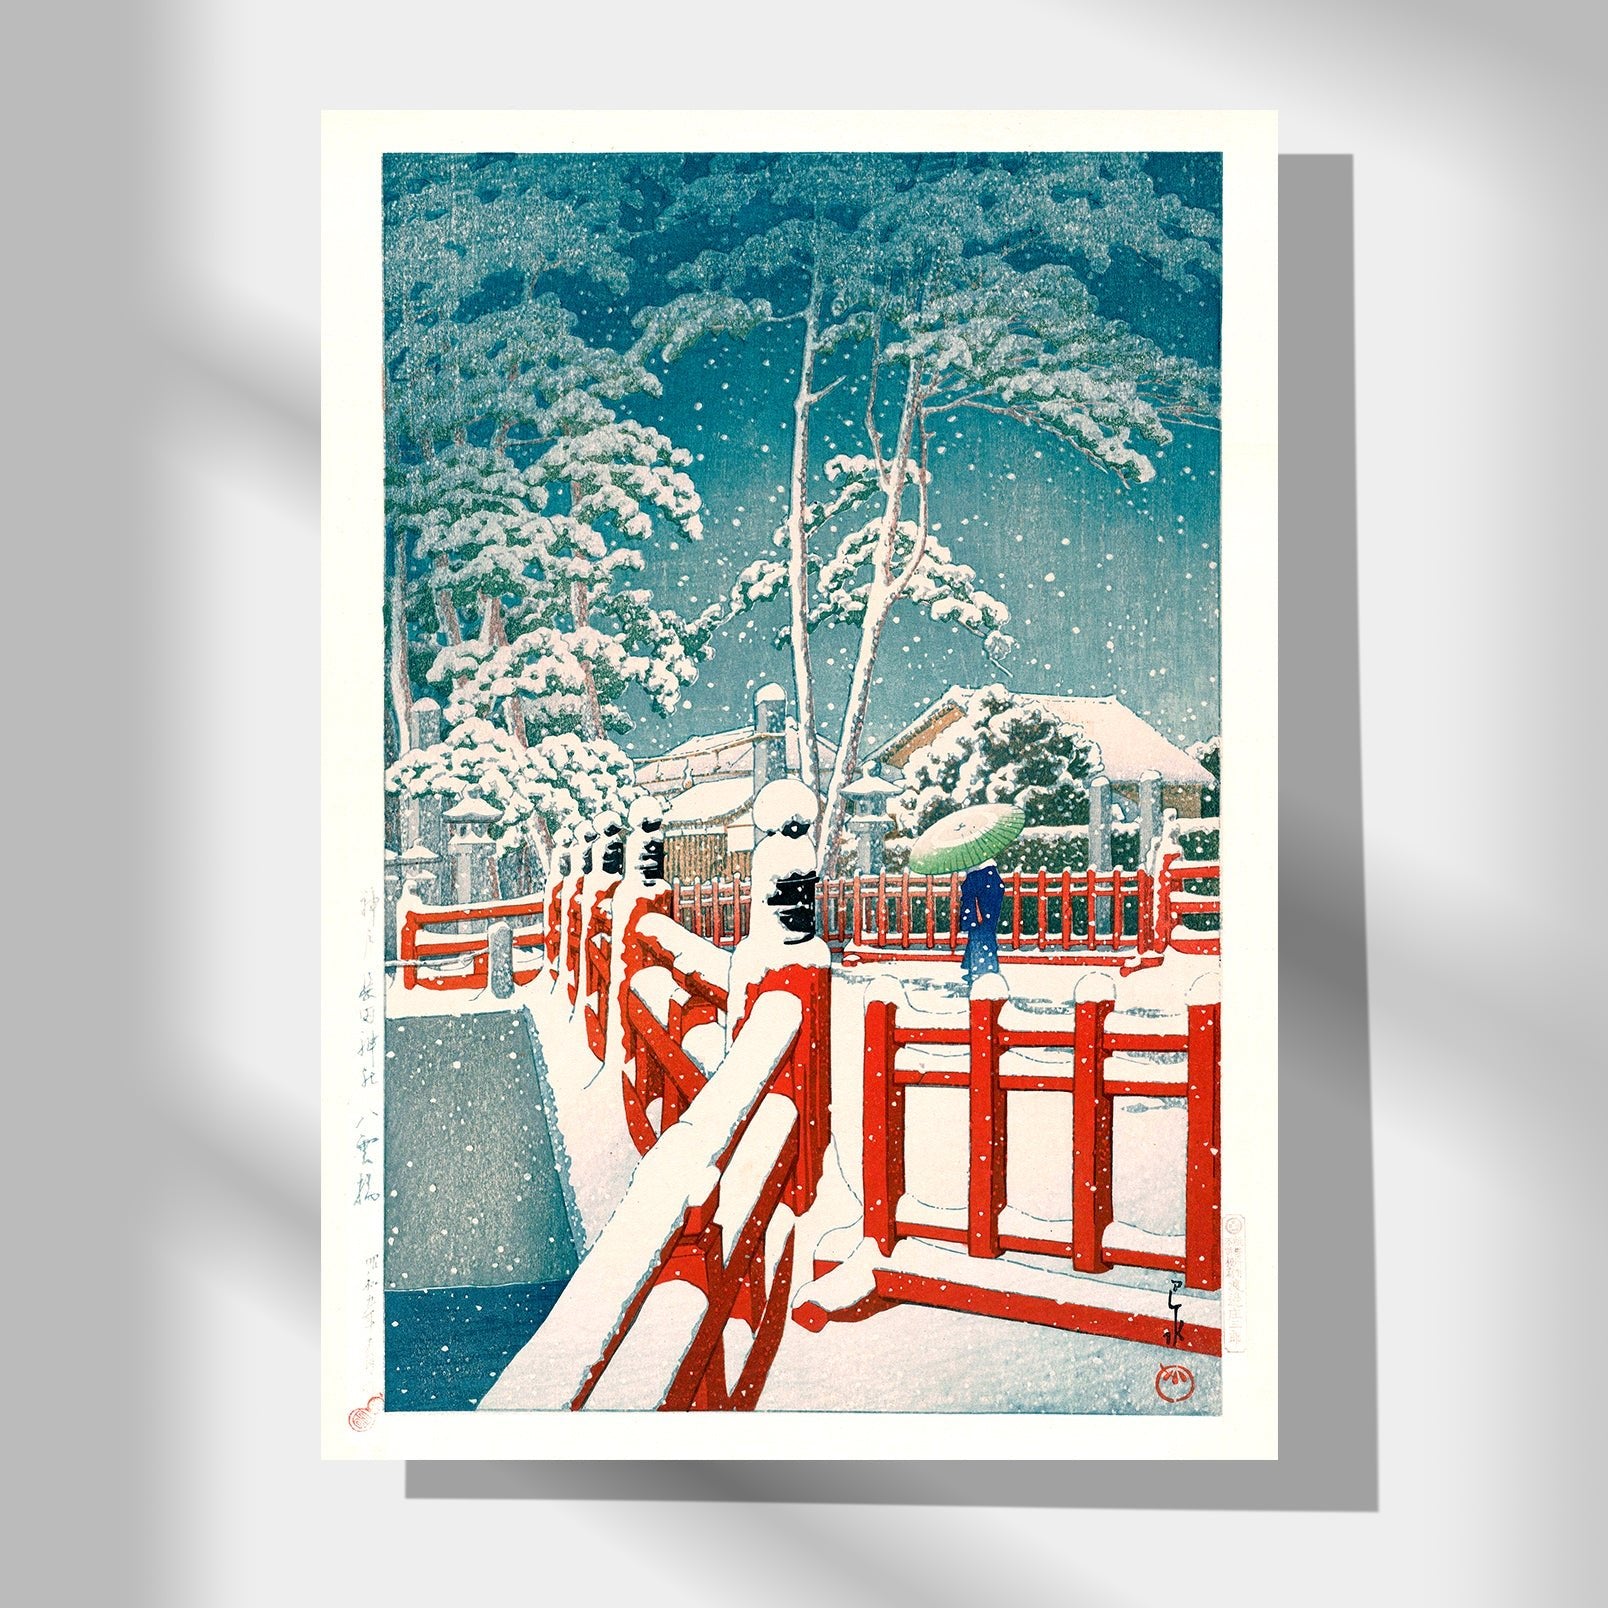 Japanese Art Poster by Kawase Hasui featuring a woman with an umbrella crossing a red bridge in the snow